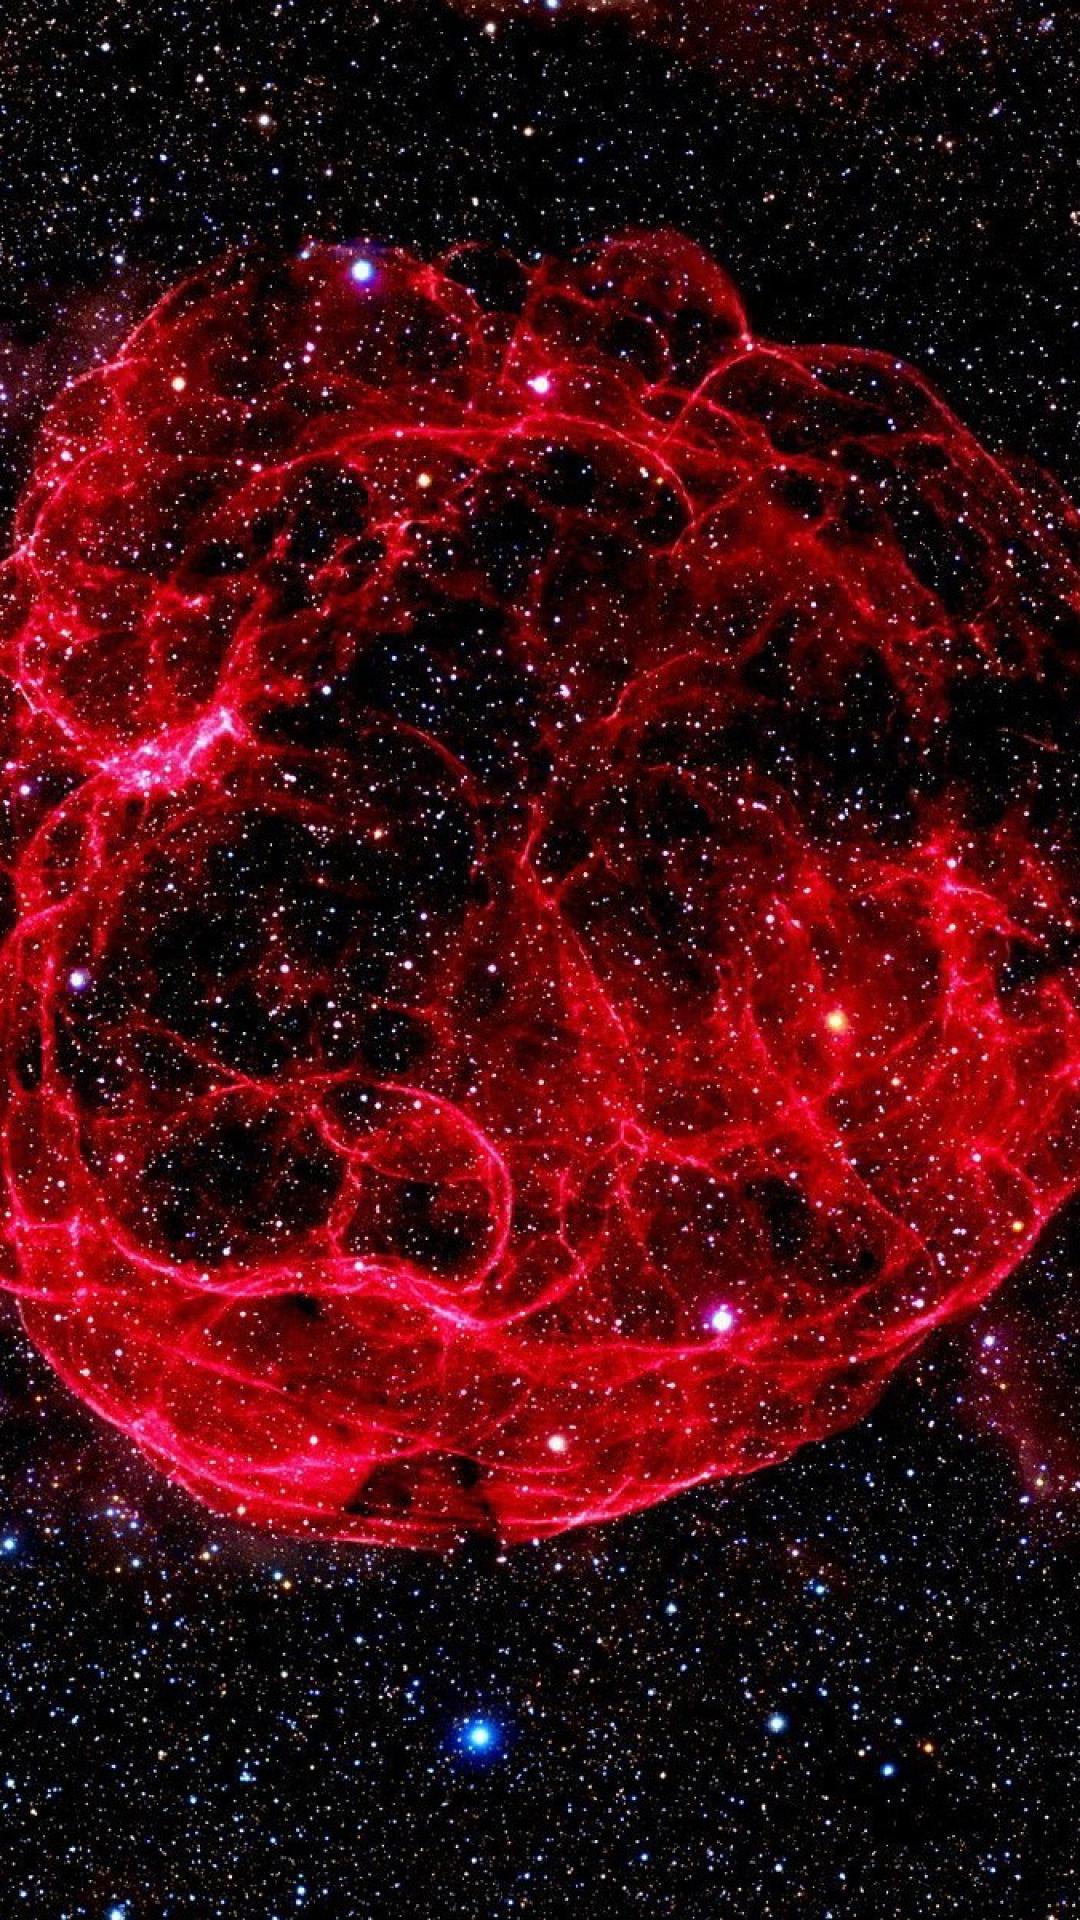 red galaxy wallpaper iphone